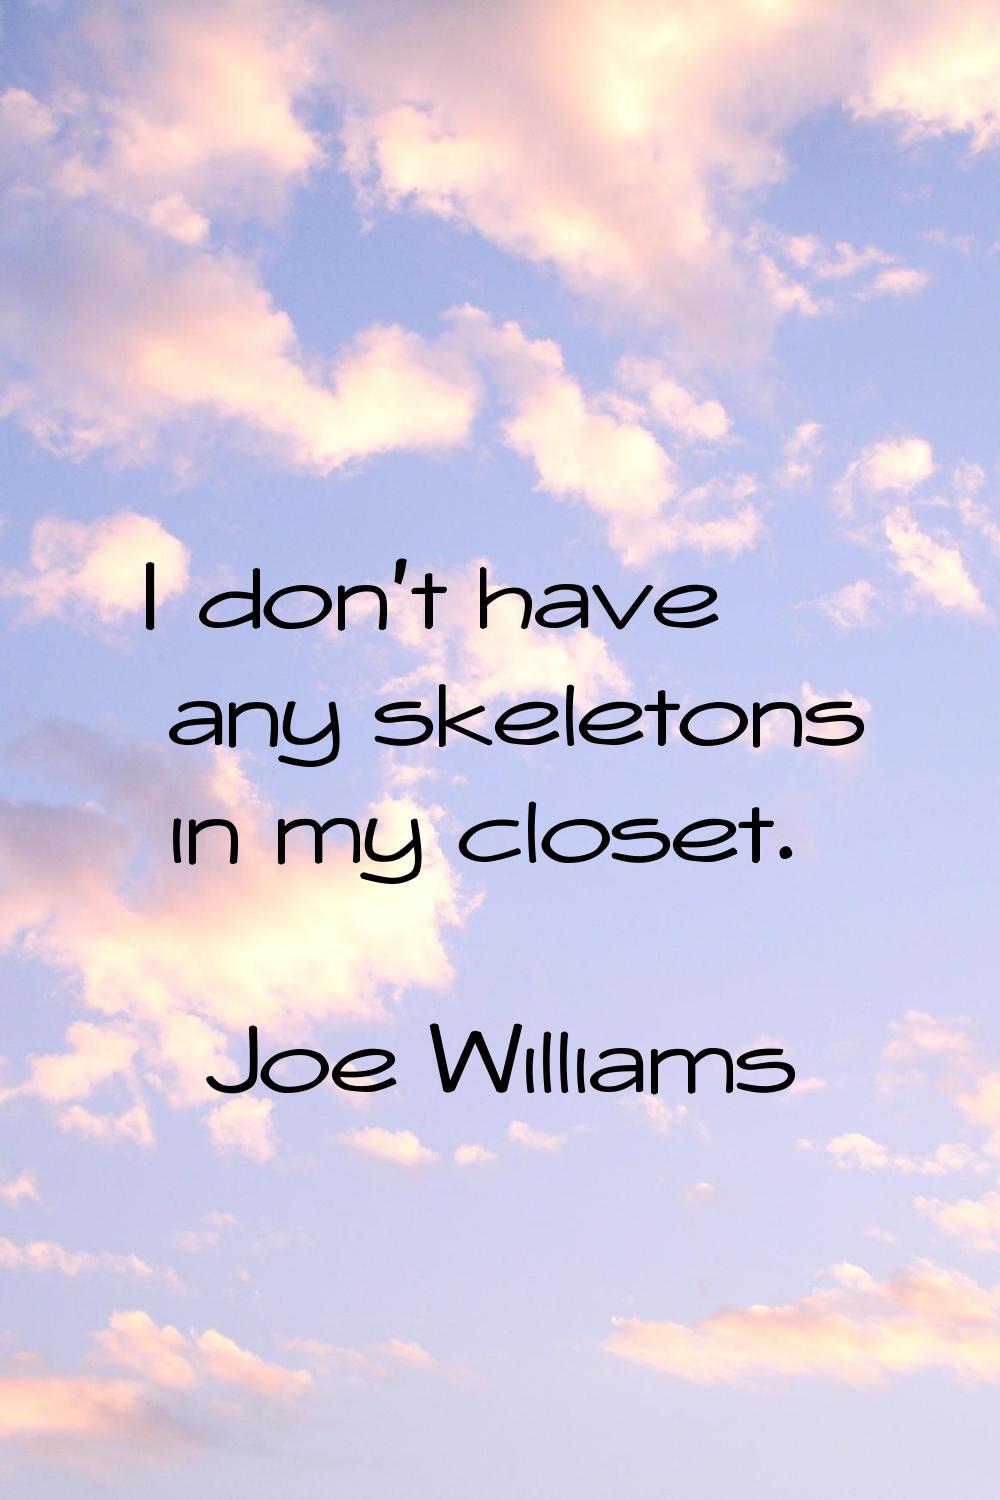 I don't have any skeletons in my closet.